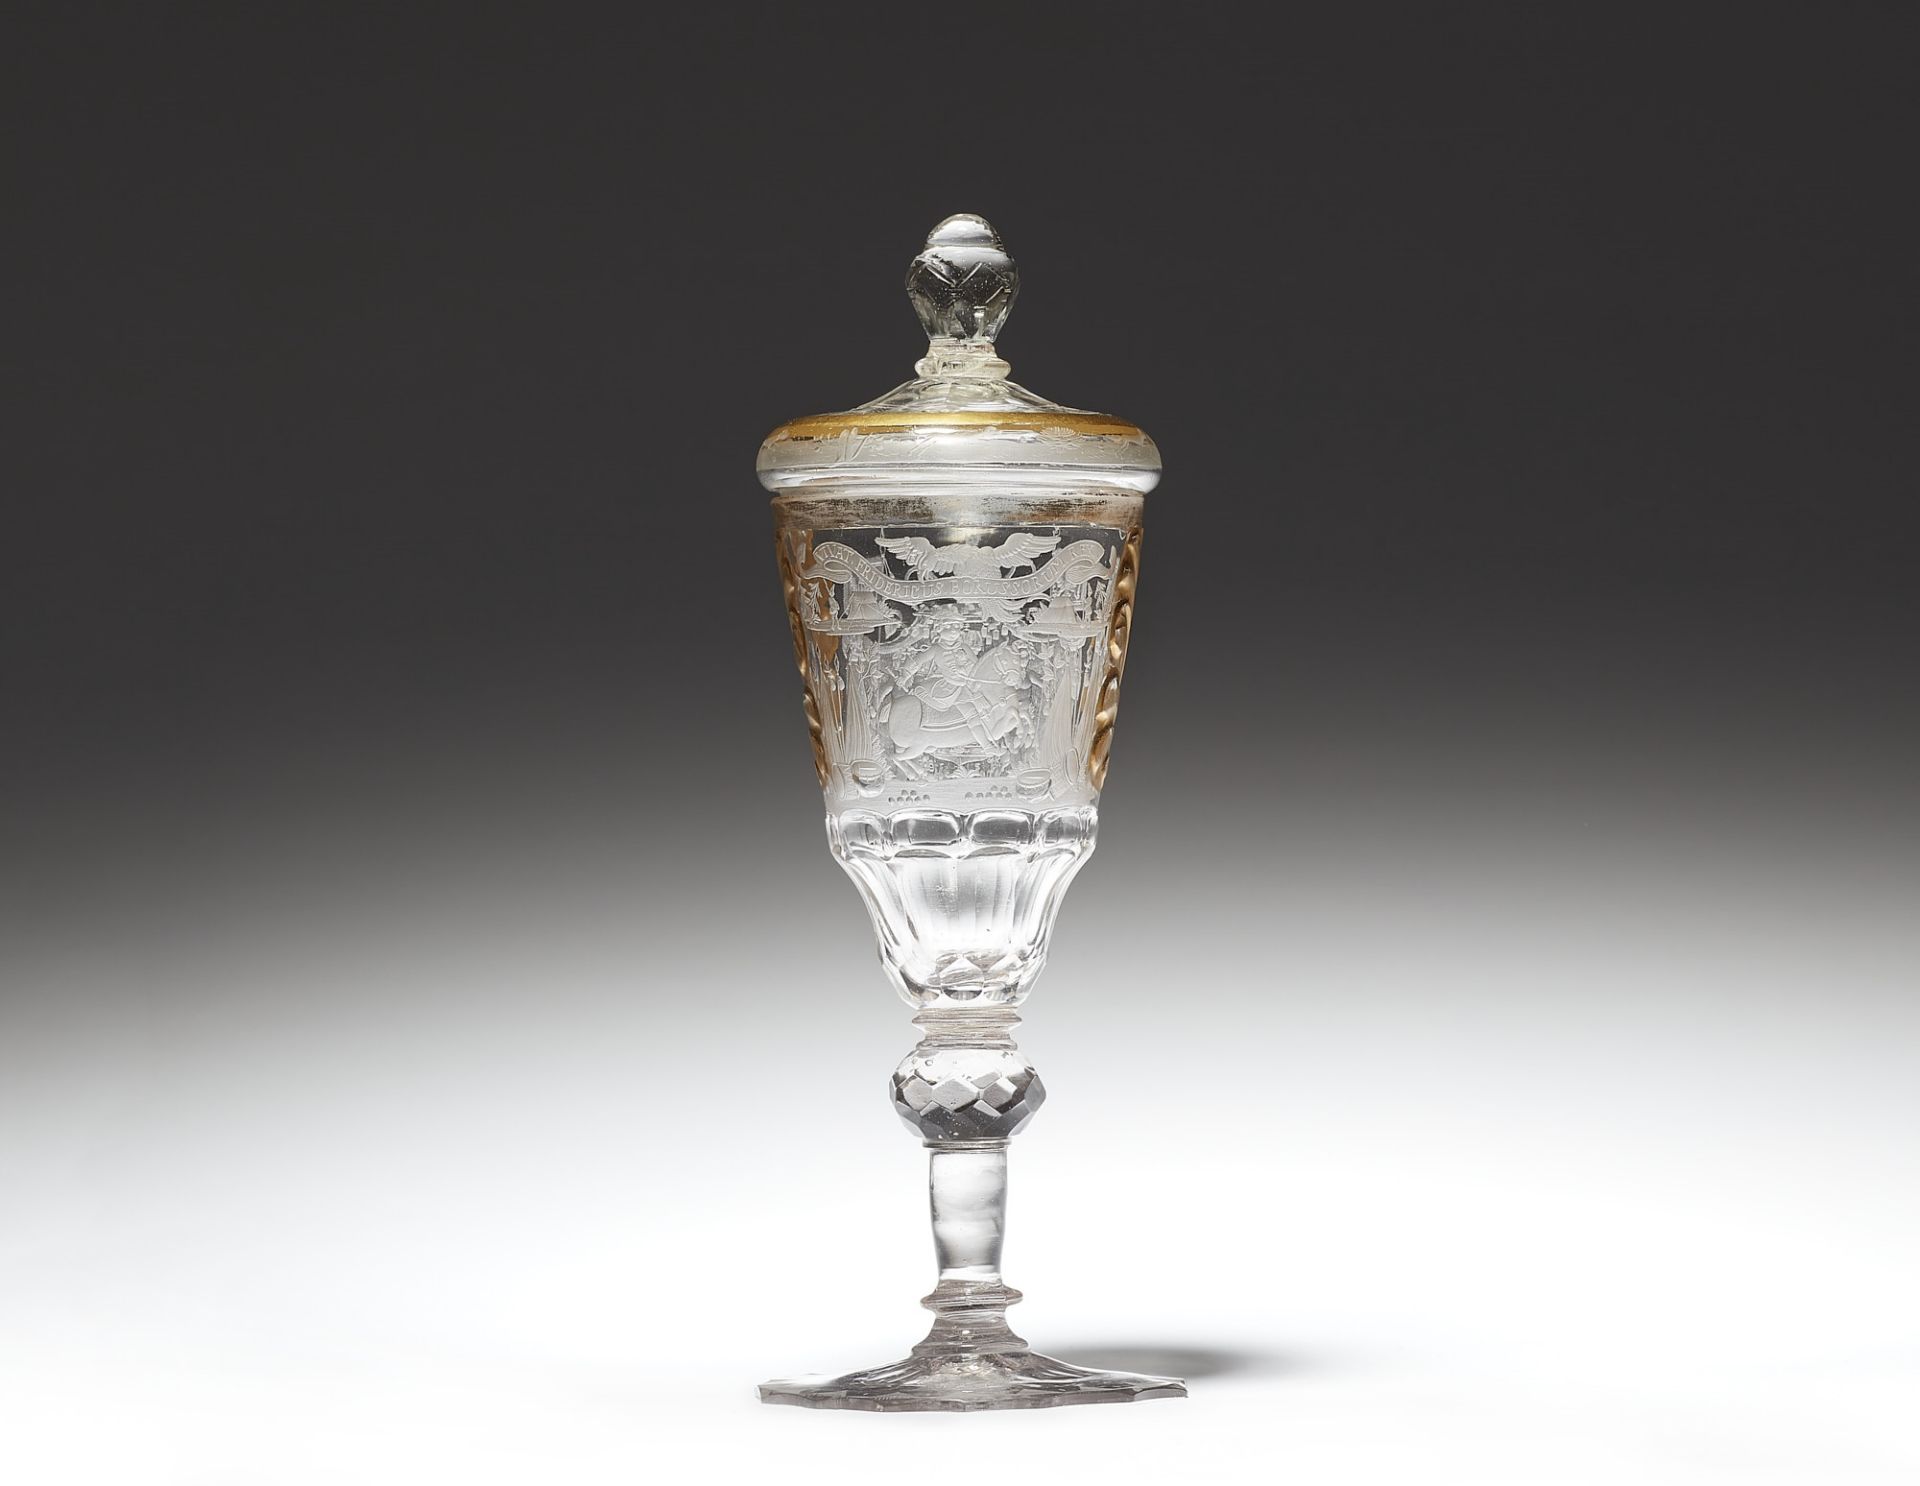 A rare cut glass goblet and cover with a portrait and the arms of Friedrich II